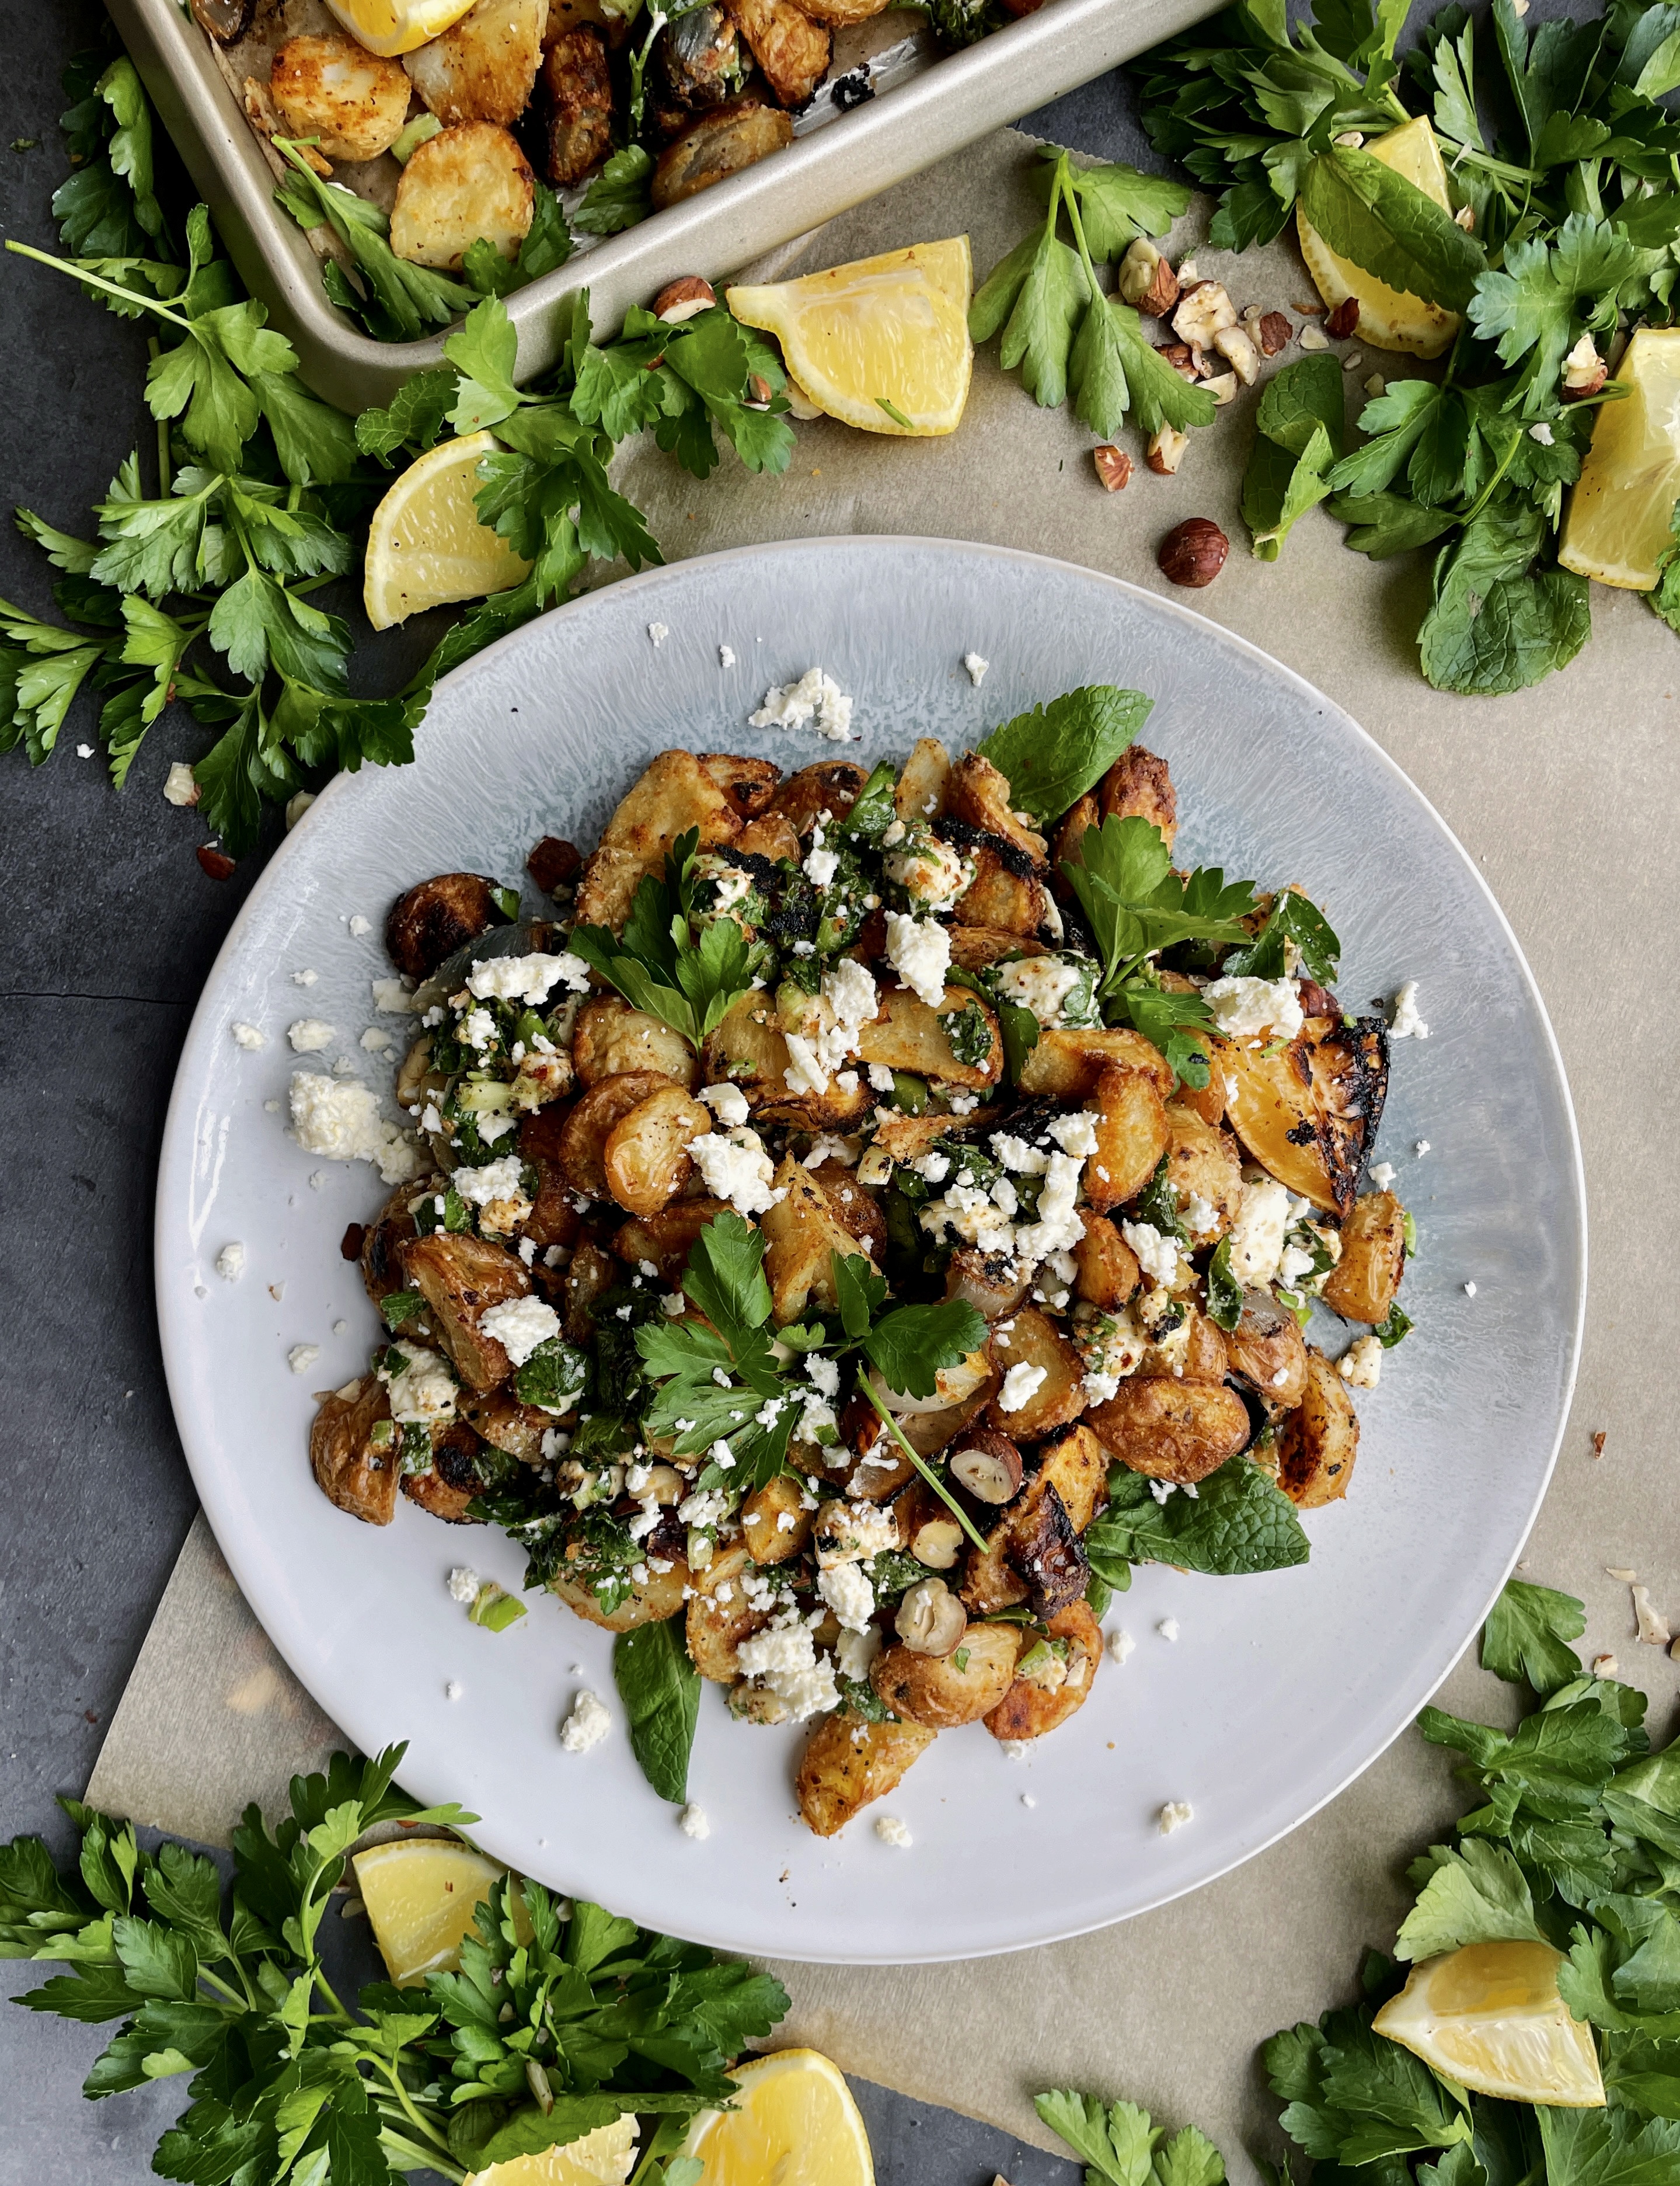 Roasted lemon, caramelized shallots, and your favorite hummus roasted up with baby potatoes and topped with allll the herbs and feta: these Crispy Greek Hummus Crusted Potatoes are an all time fav side!